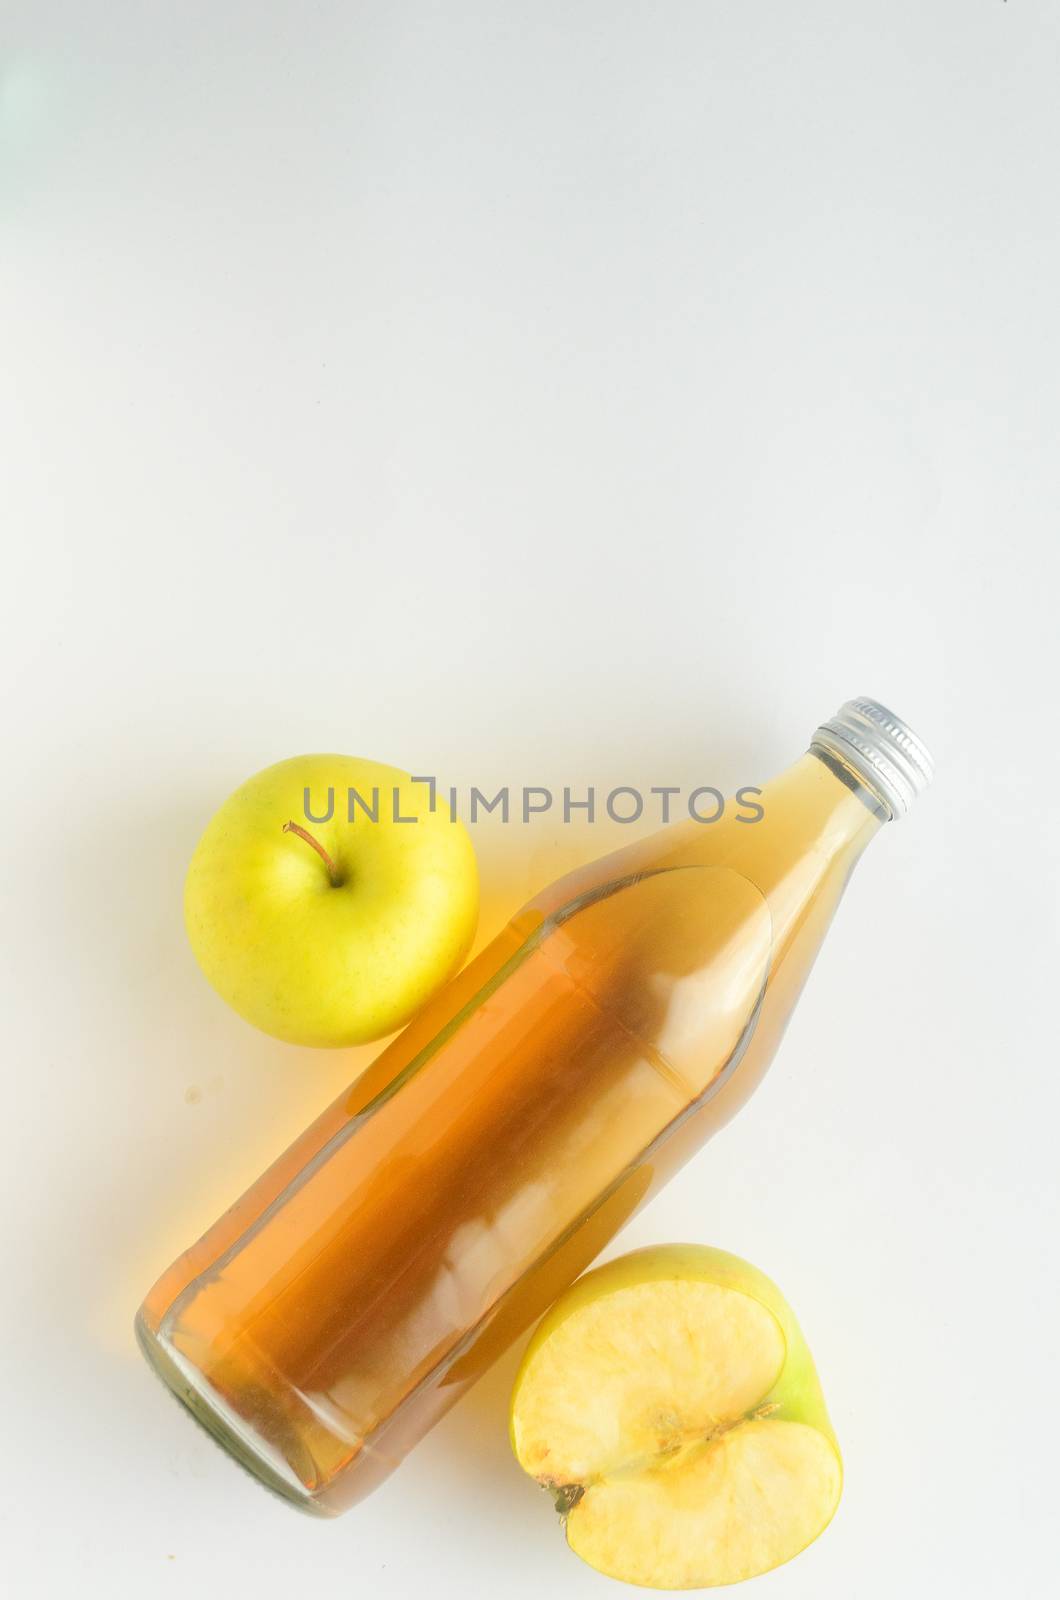 Top view, a bottle of apple cider vinegar and green apples on white background. by andre_dechapelle